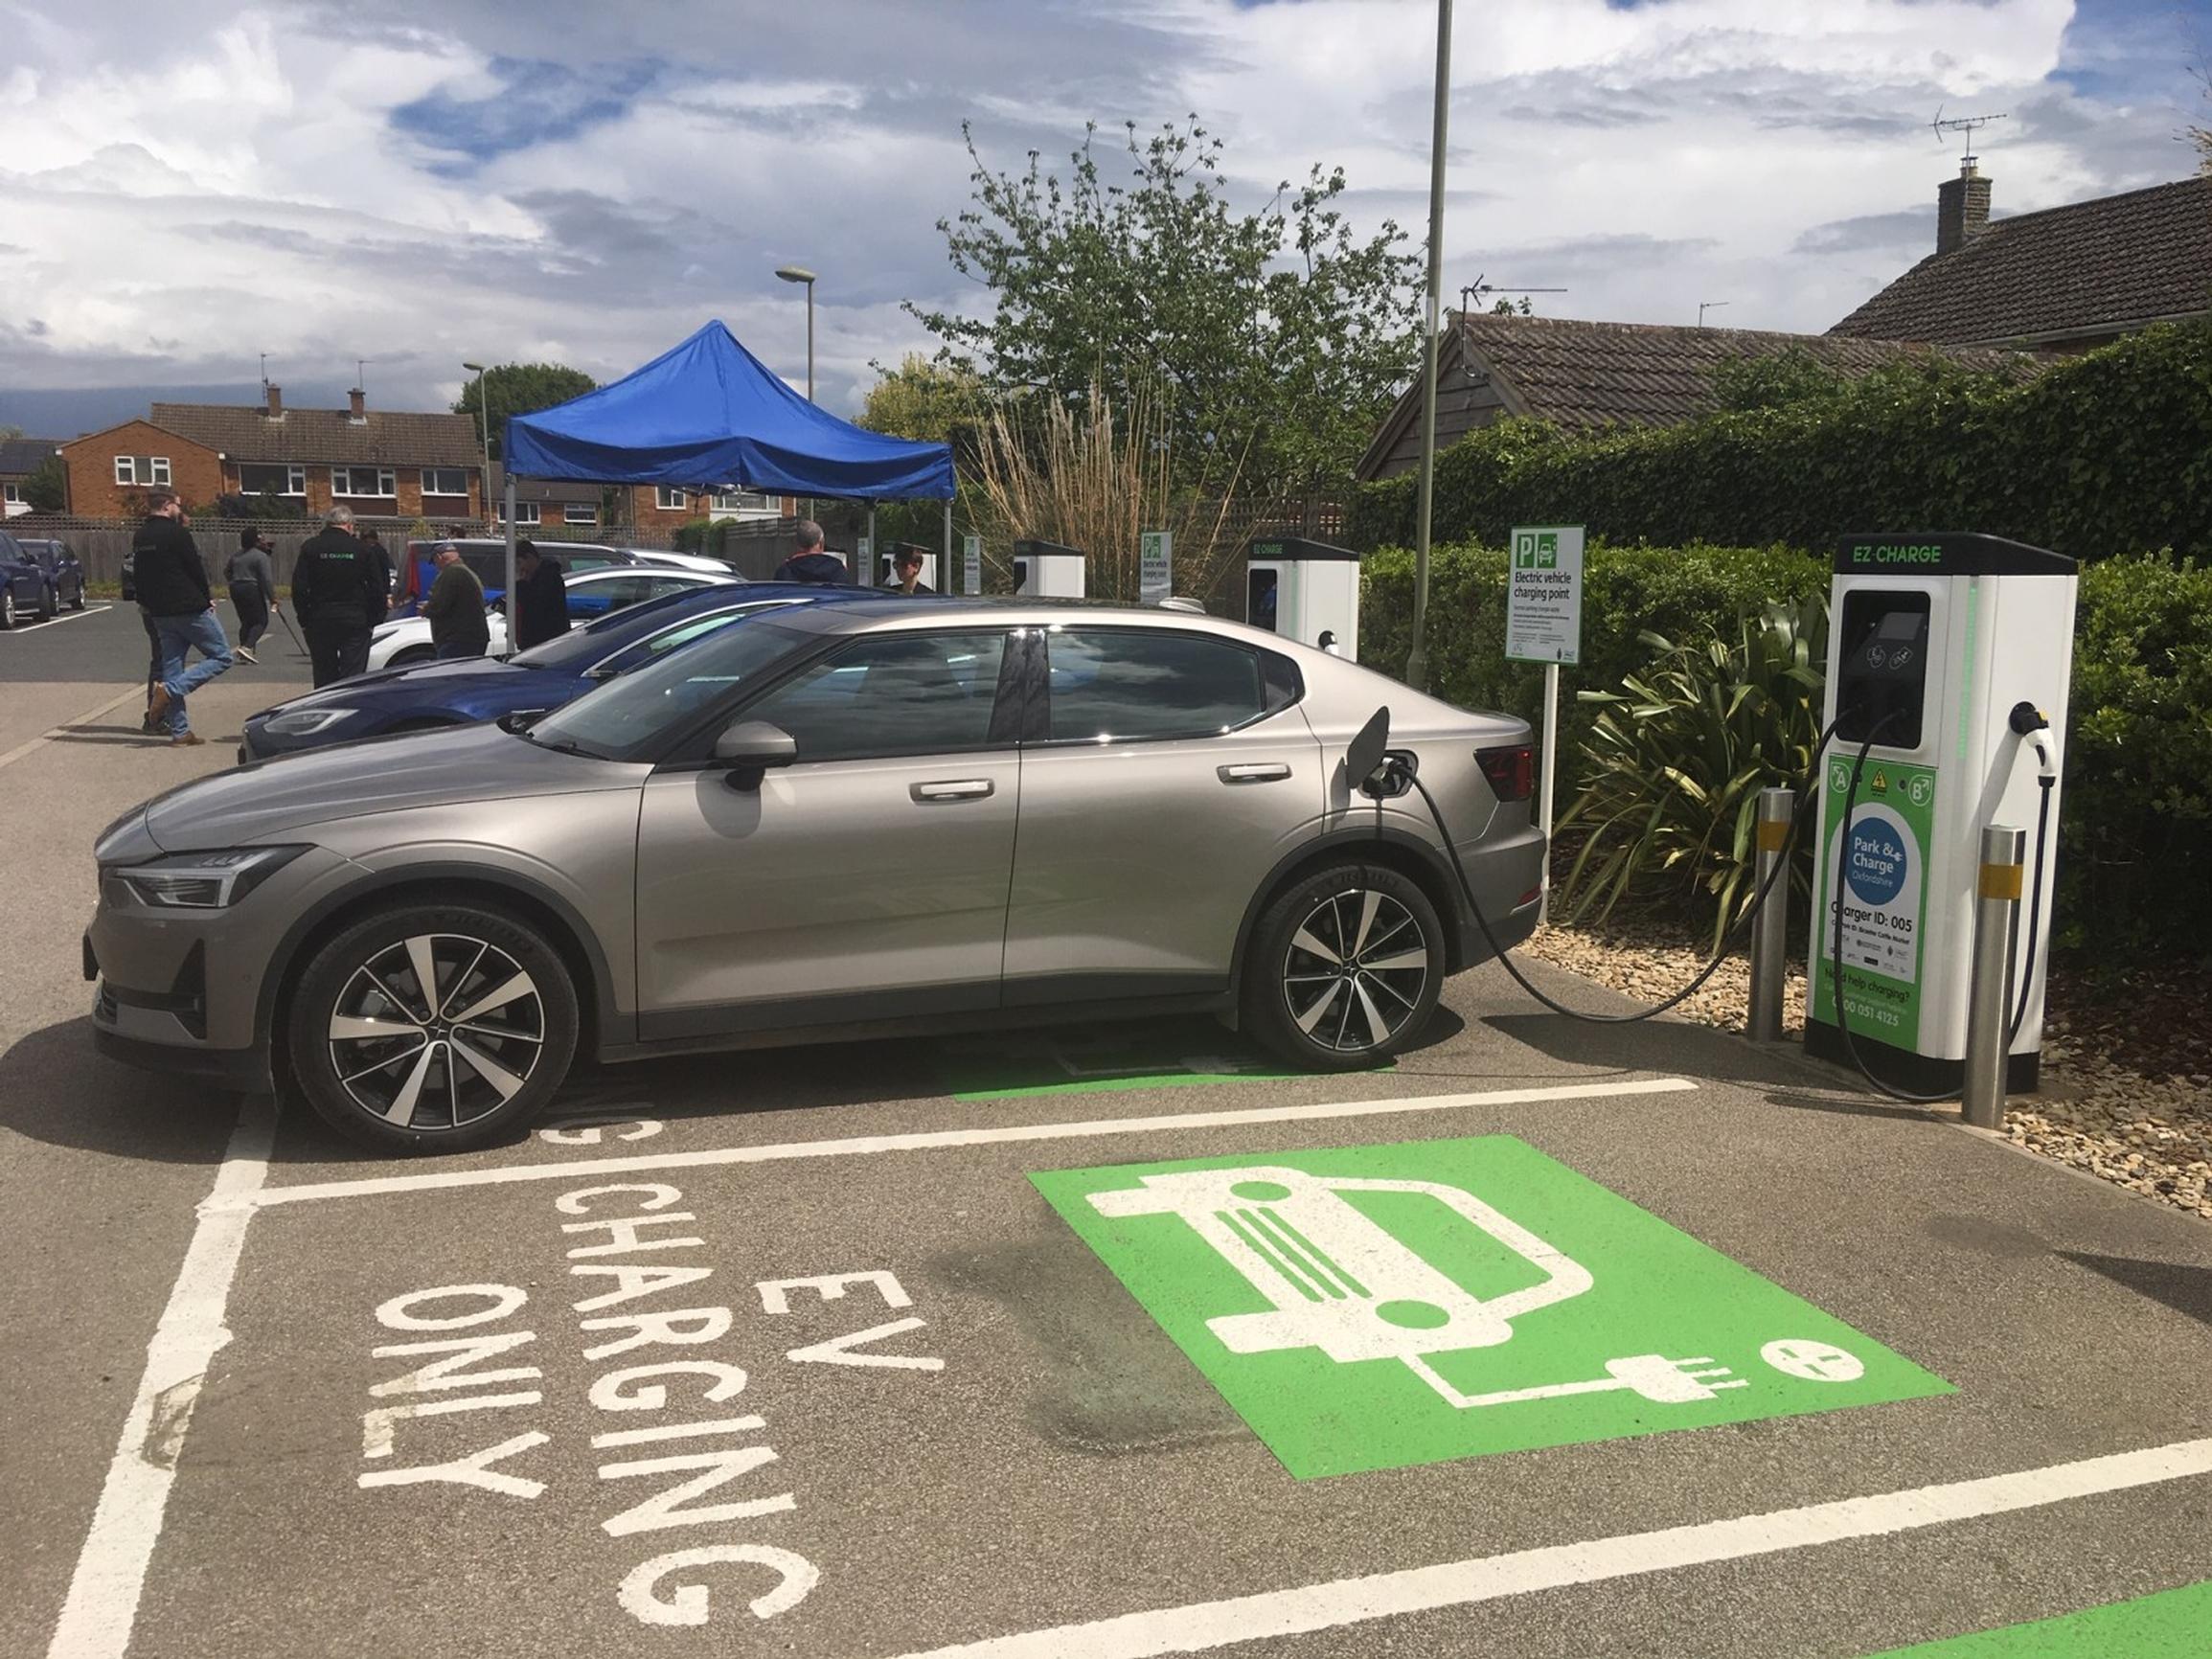 The EZ-Charge terminal at Bicester Cattle Market